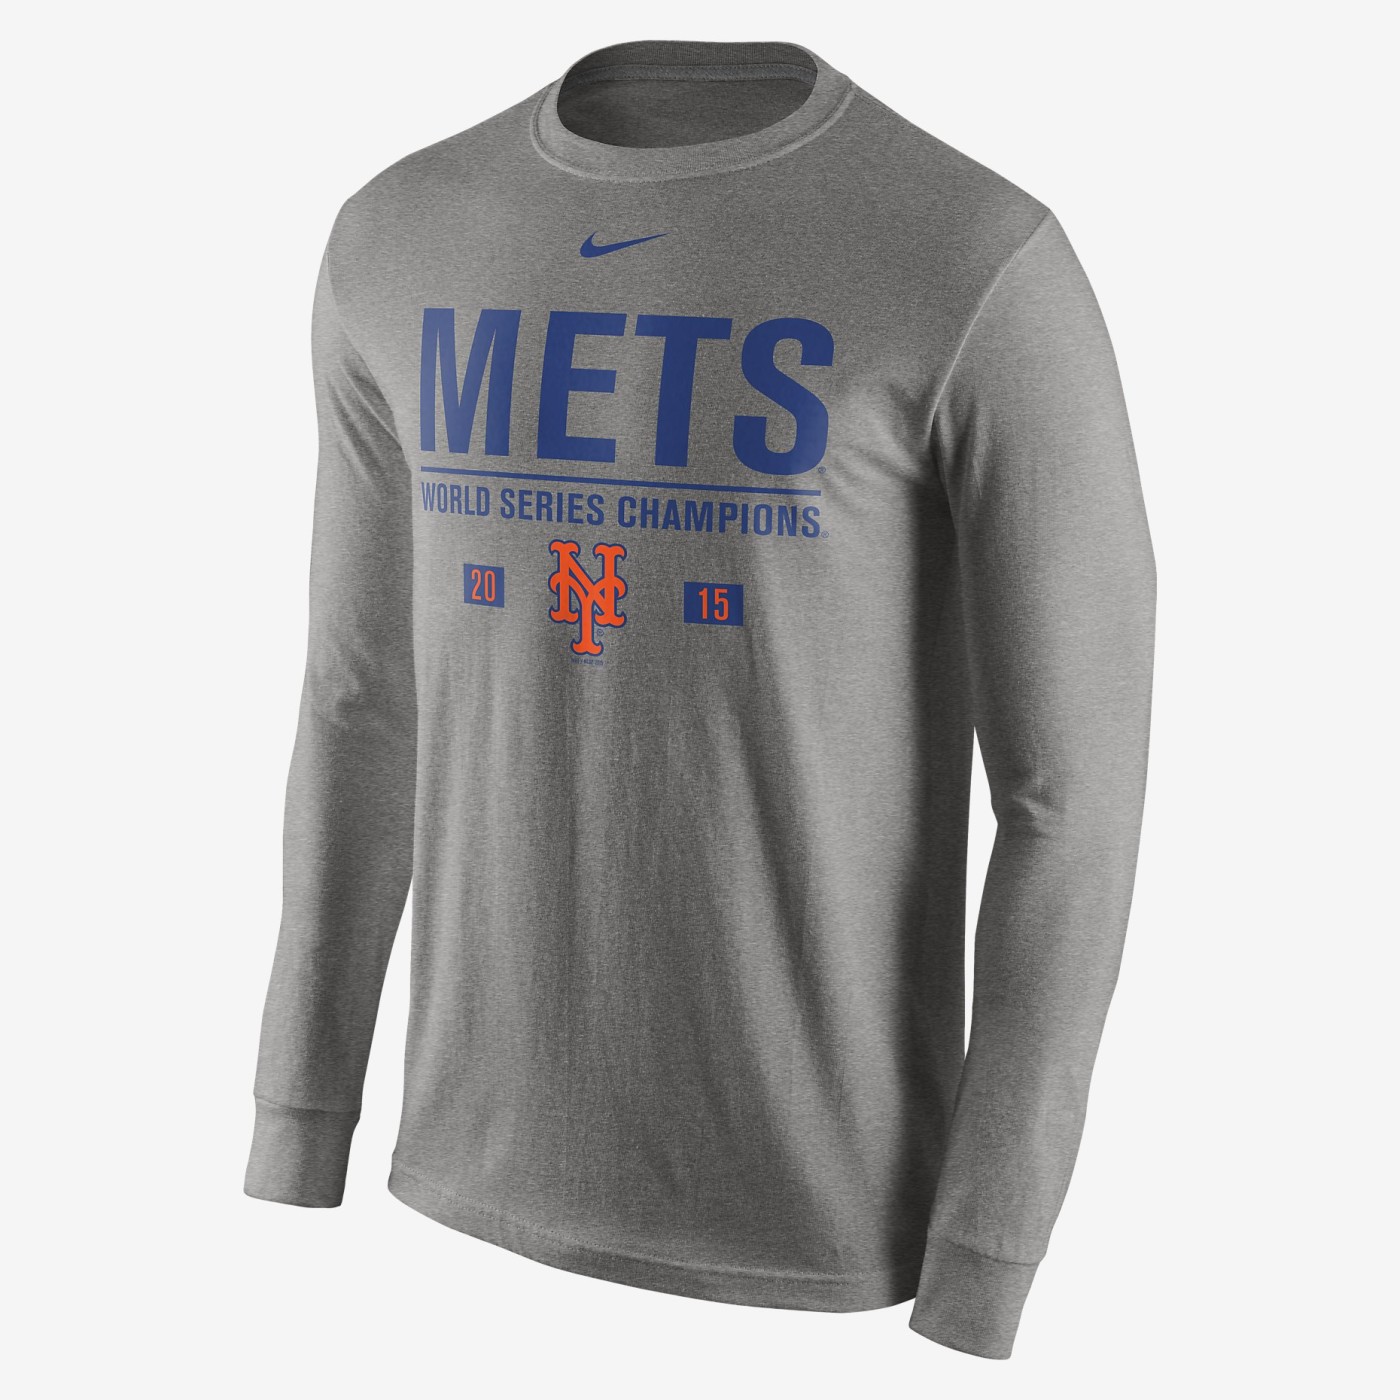 Mets Championship Apparel You'll Never Be Able To Buy | Complex